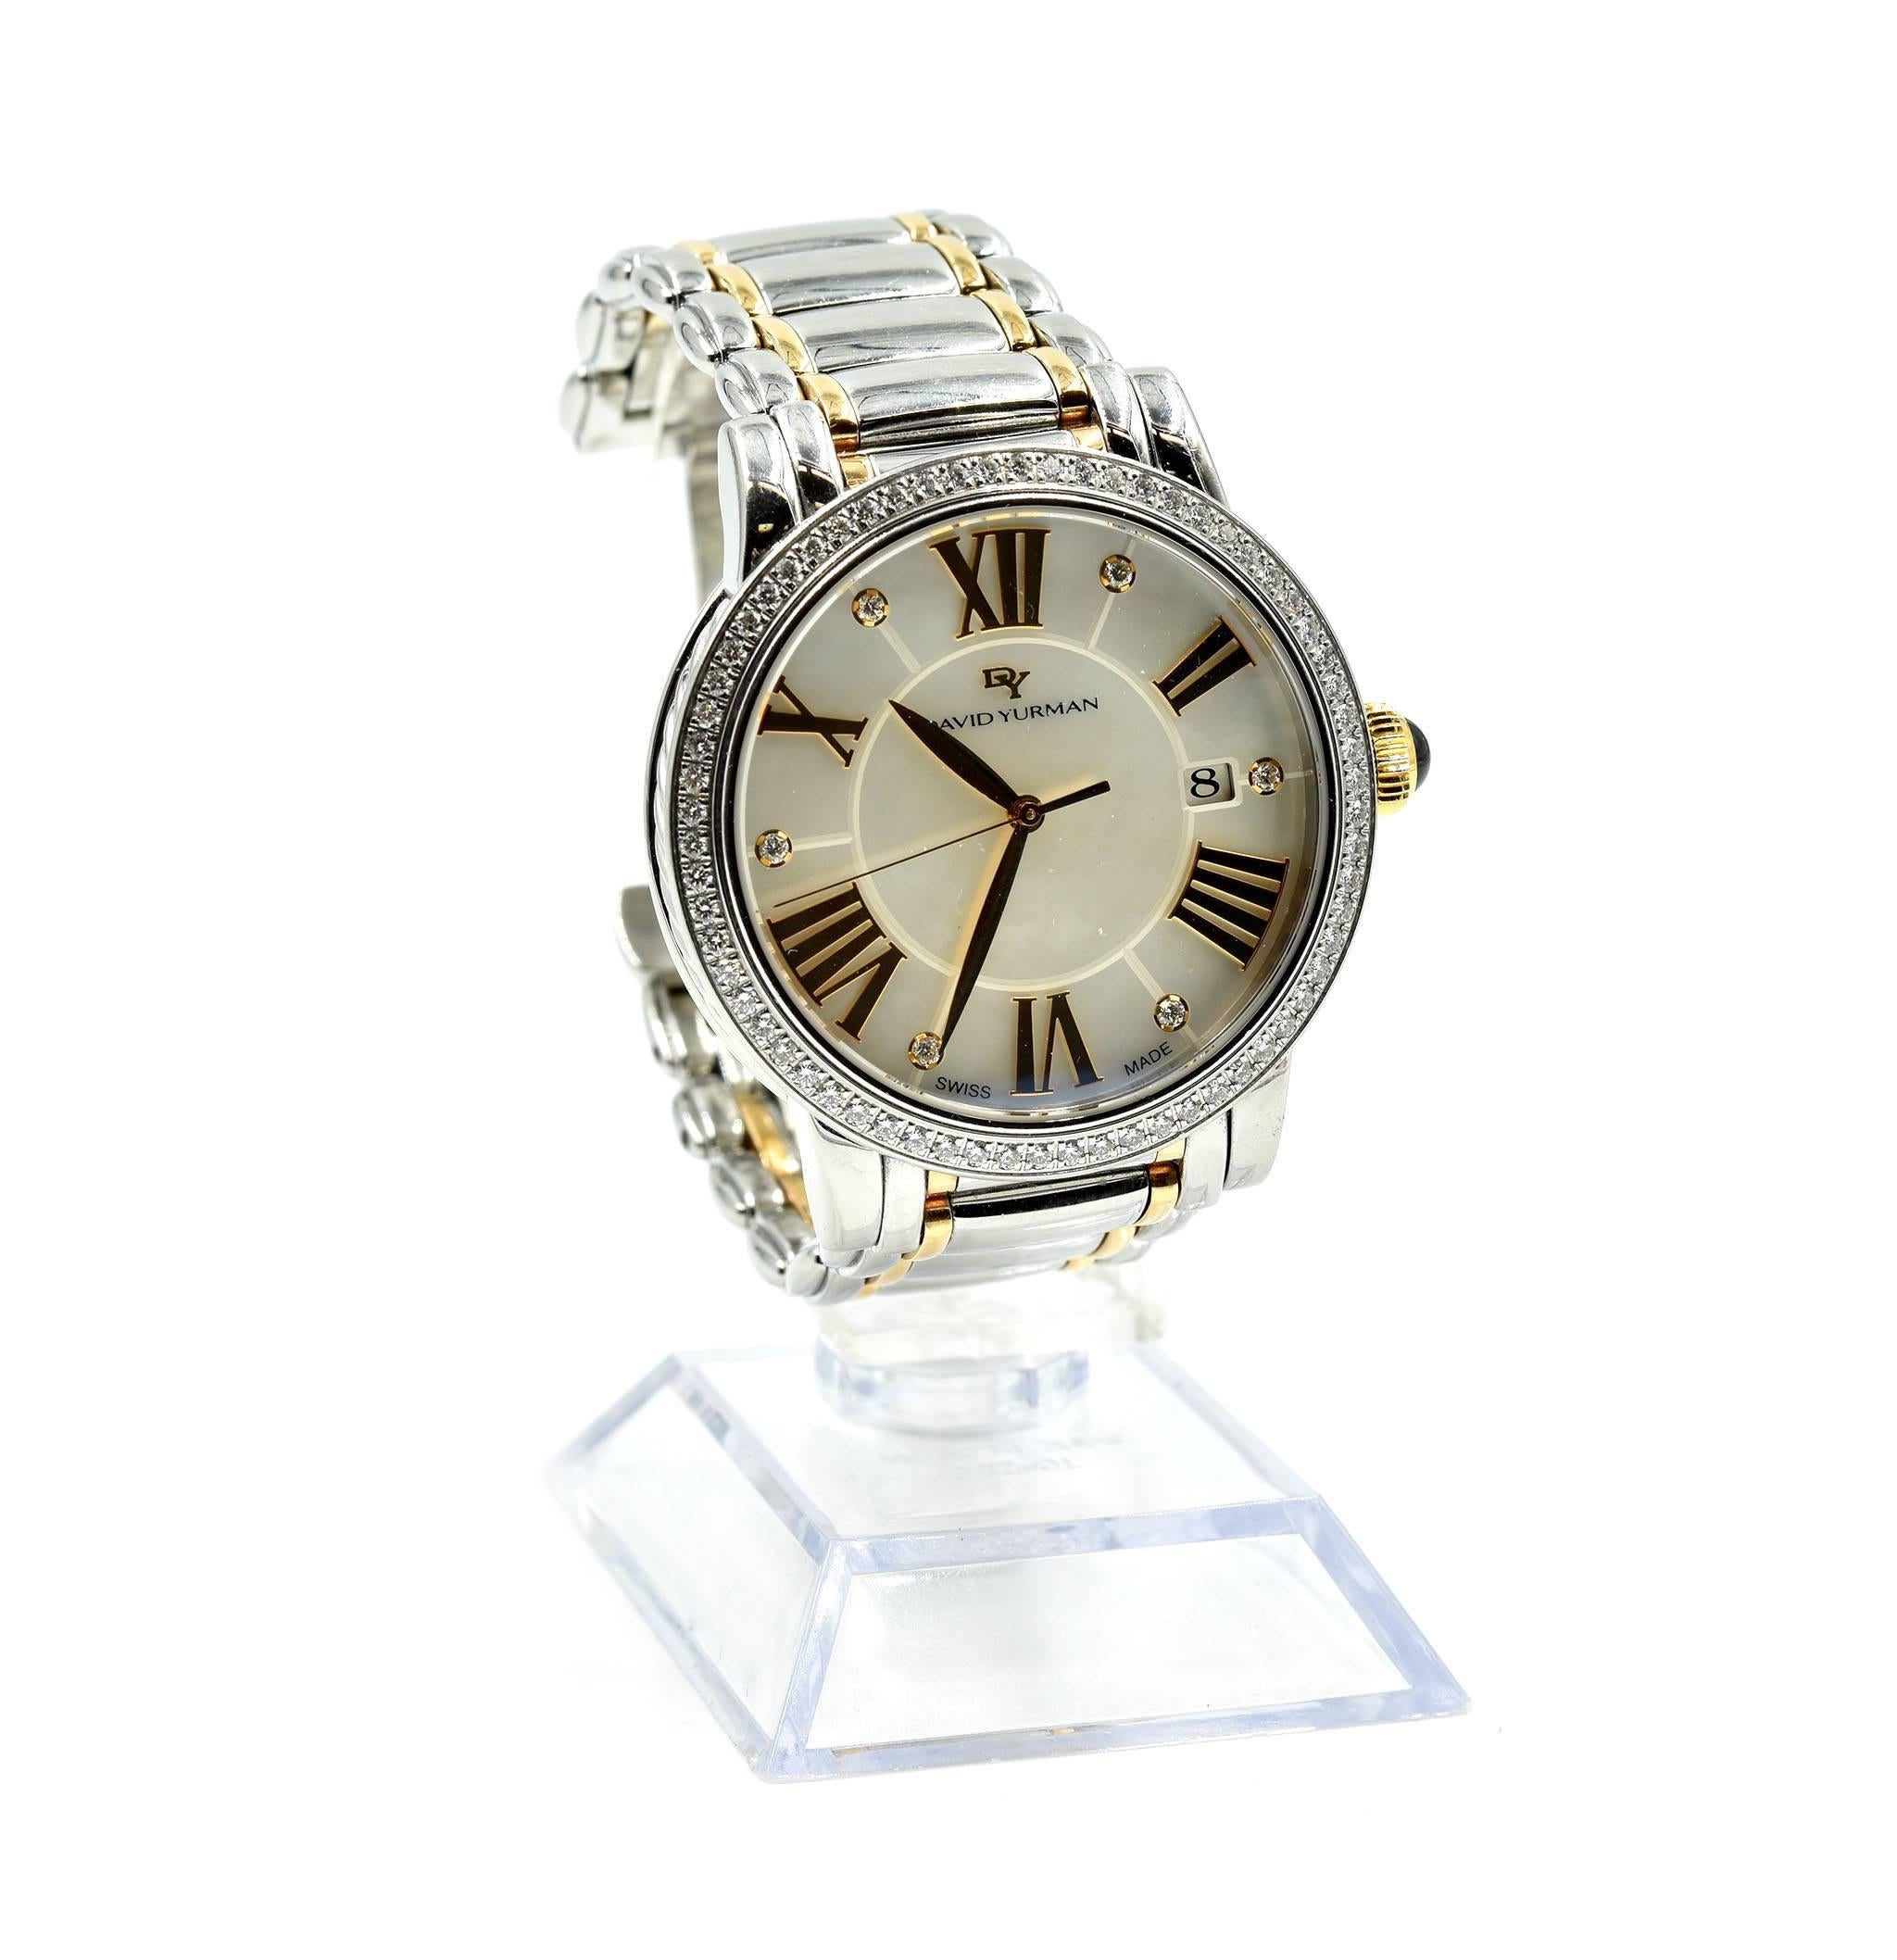 Movement: quartz
Function: hours, minutes, seconds, date
Case: round 38.40mm stainless steel case with cable design, diamonds on bezel, plastic crystal, solid case-back, water resistant to 30 meters
Dial: mother of pearl dial with diamonds on hour